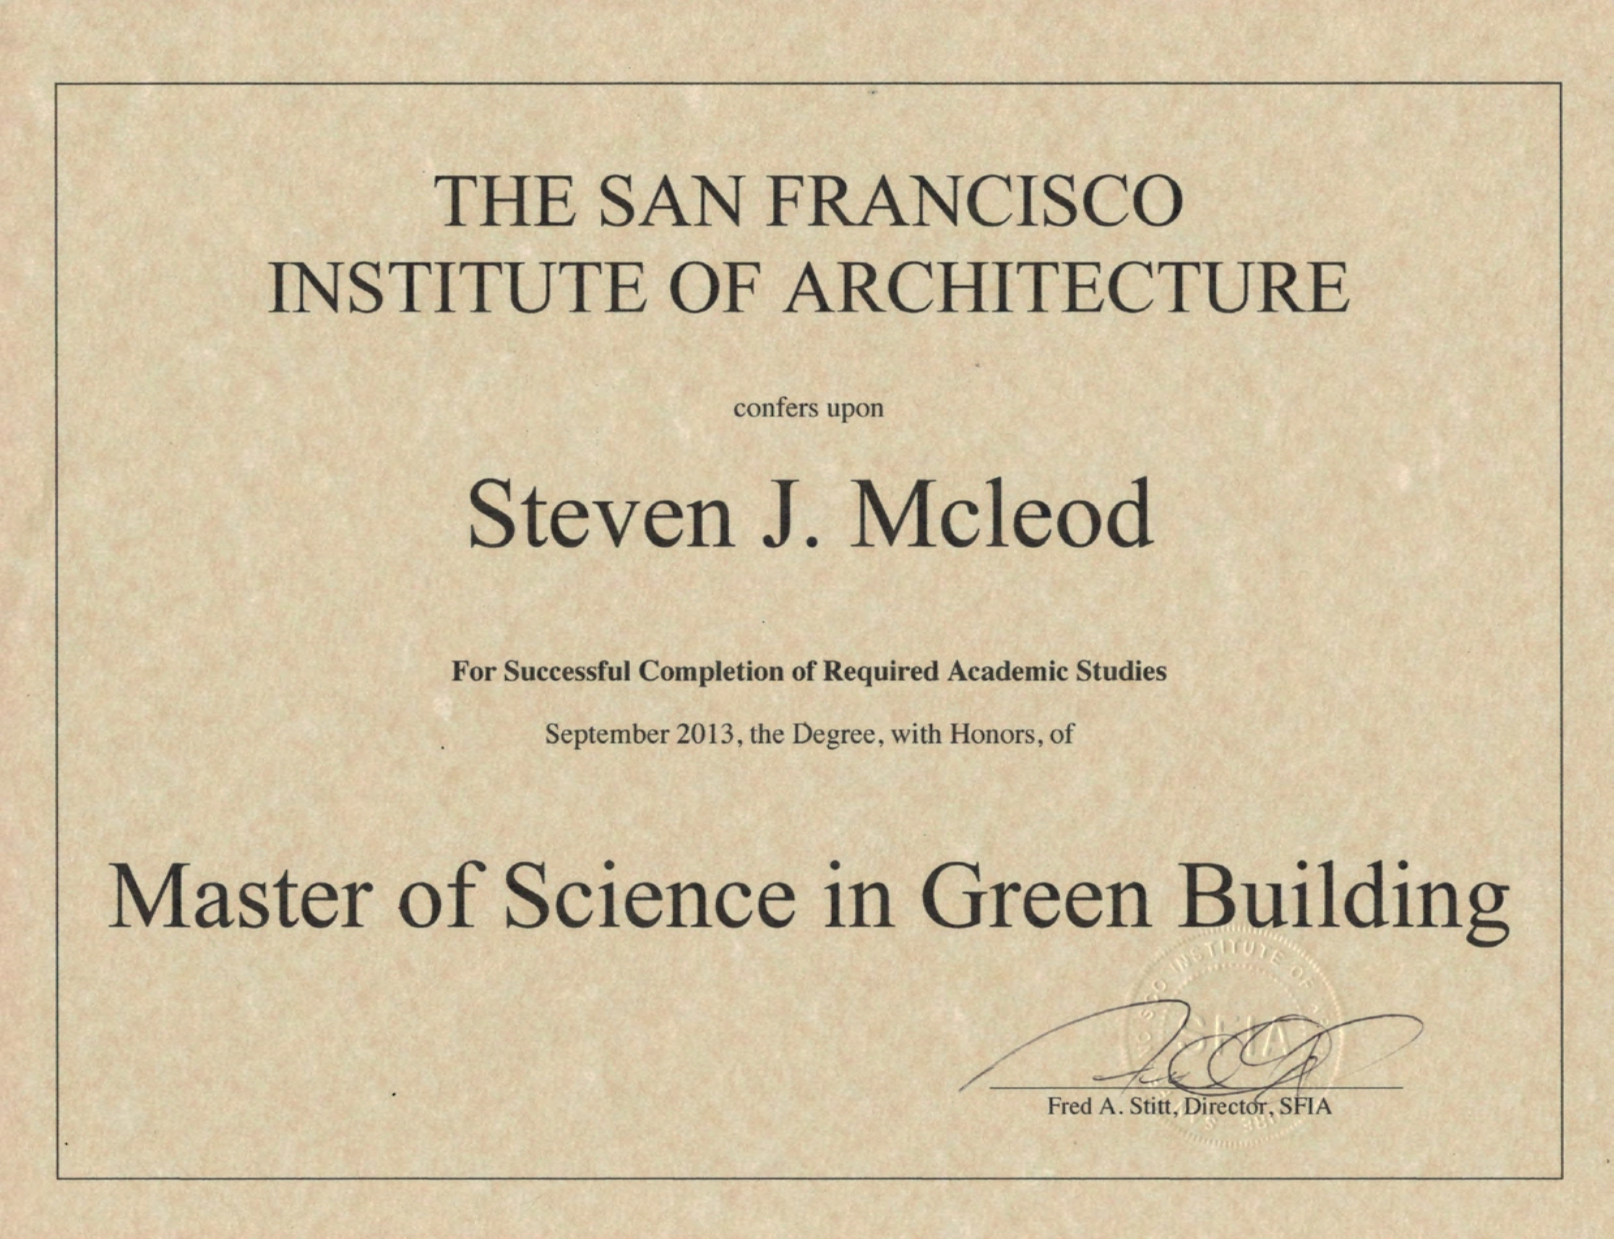 Certificate two